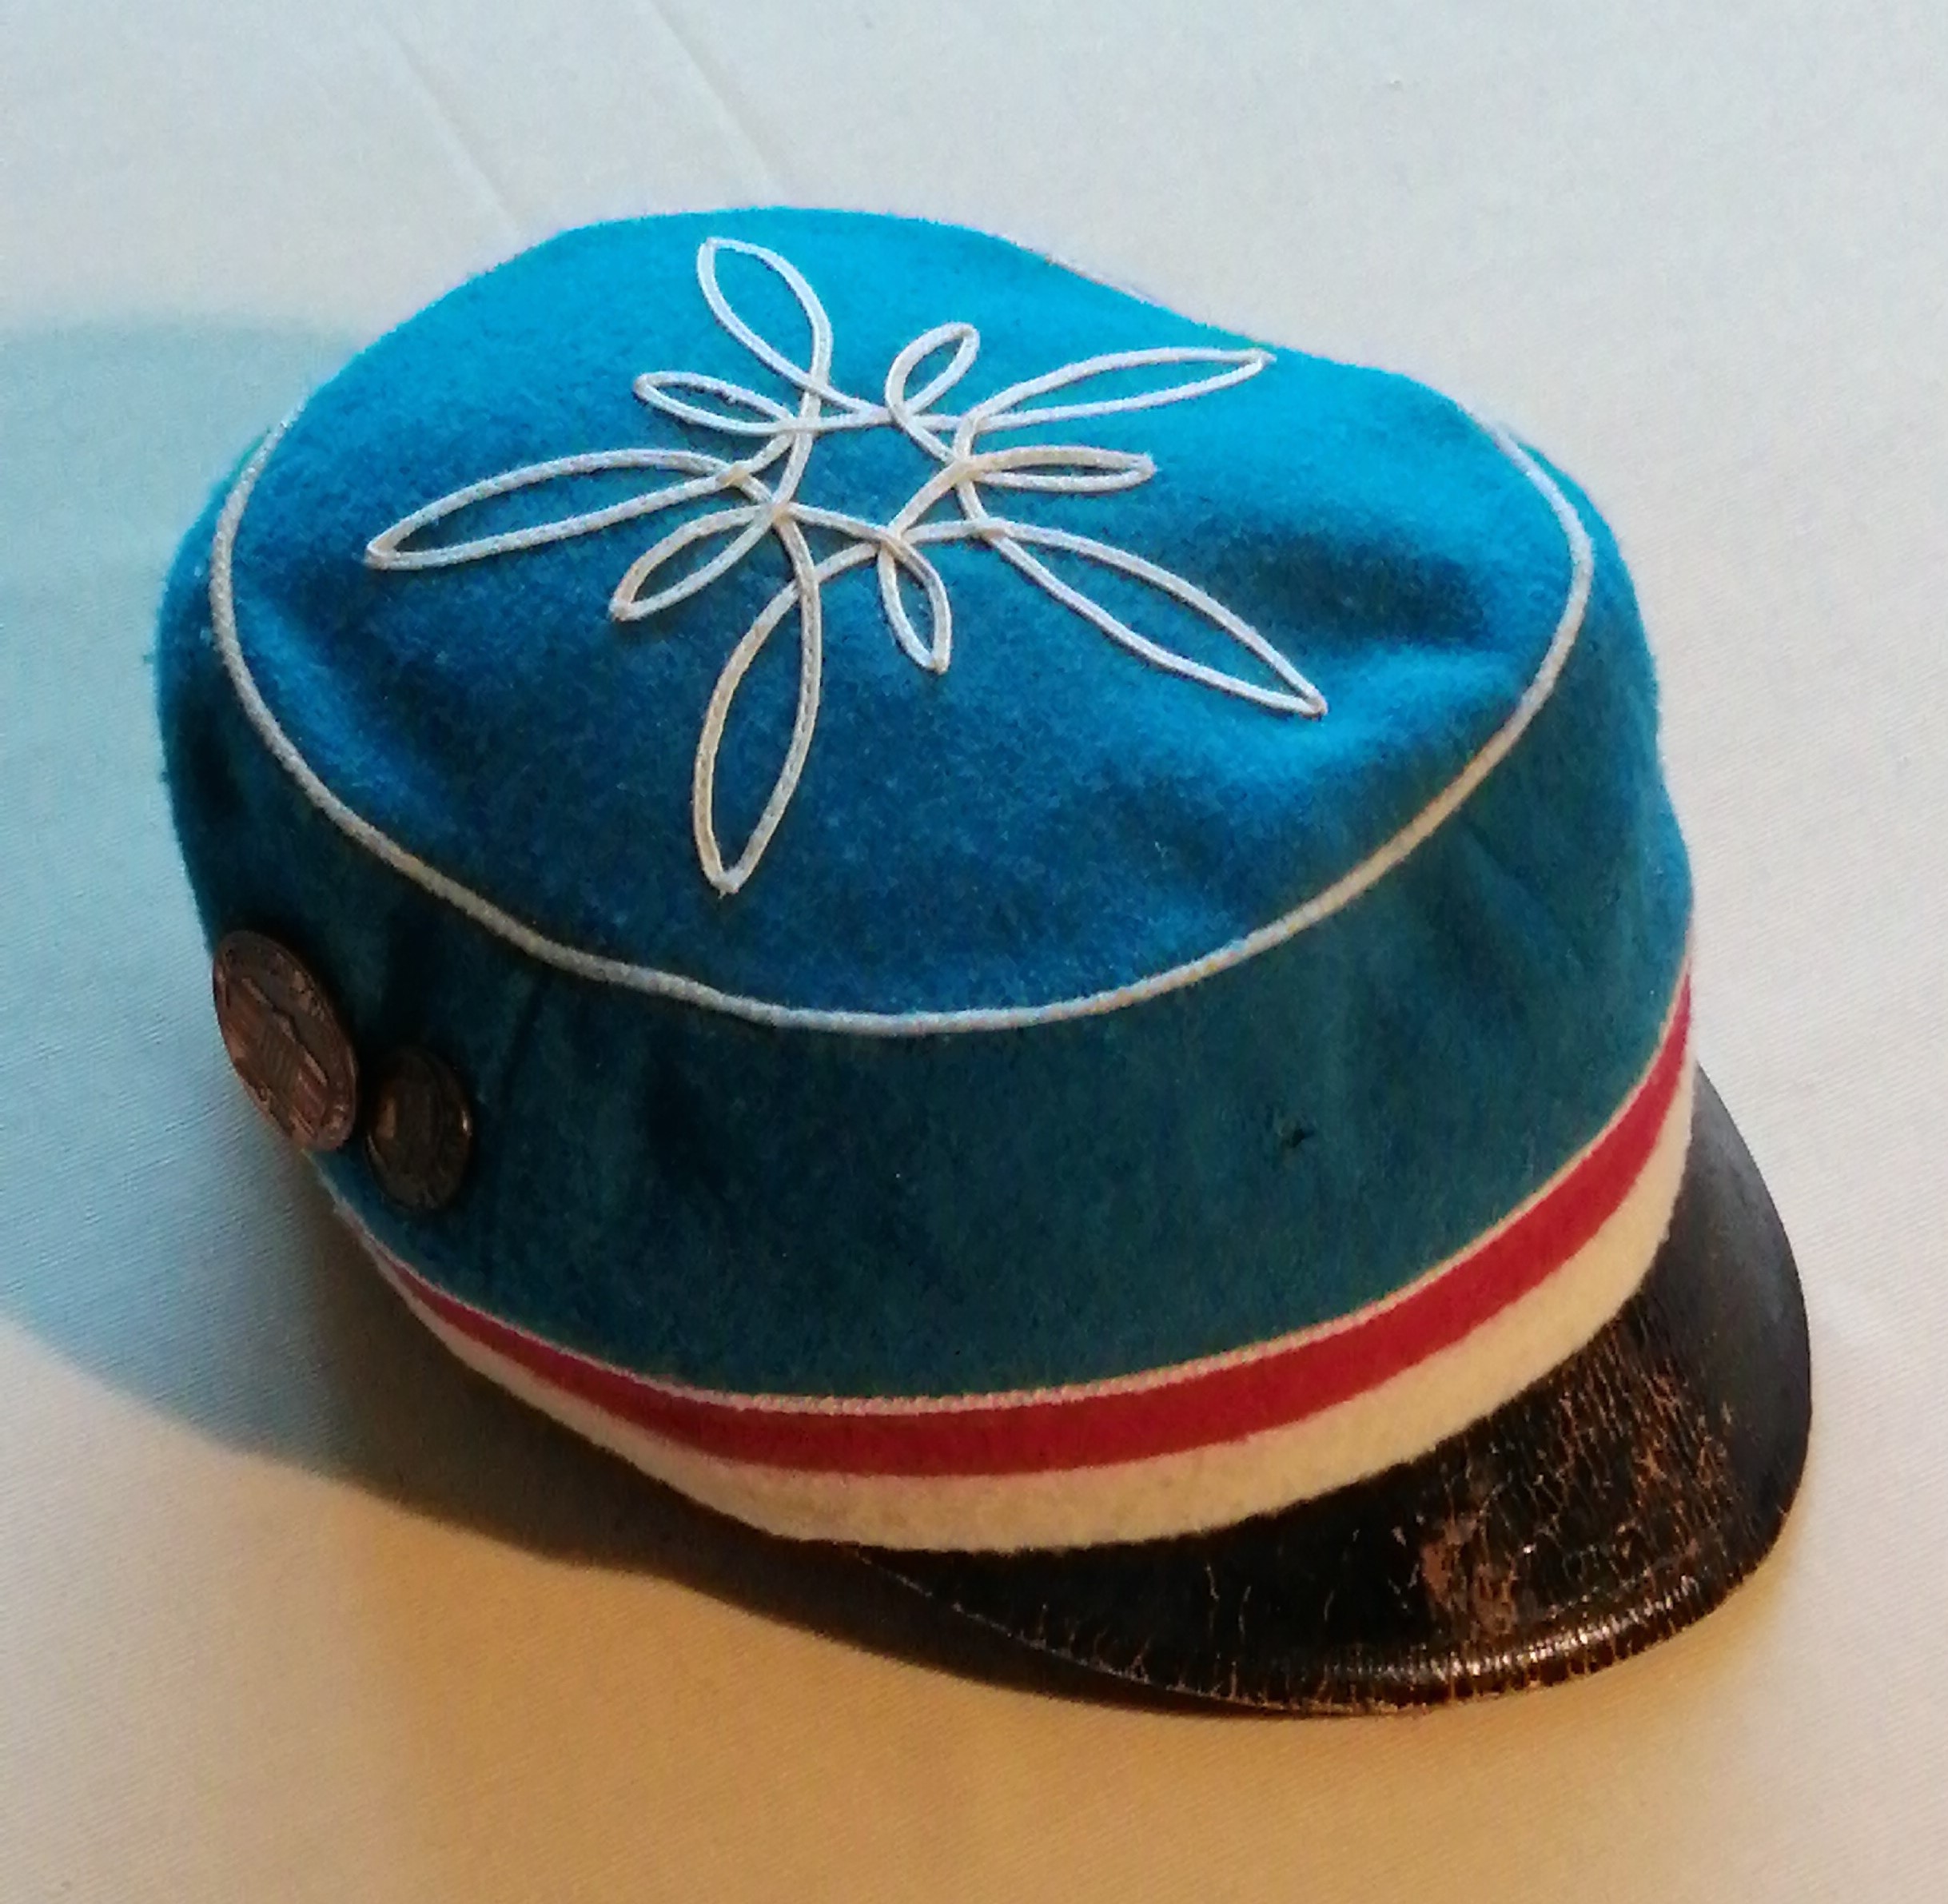 A blue cap with a red-and-white band at the bottom. The top of the cap features a white embroidered star, and the peak is black.